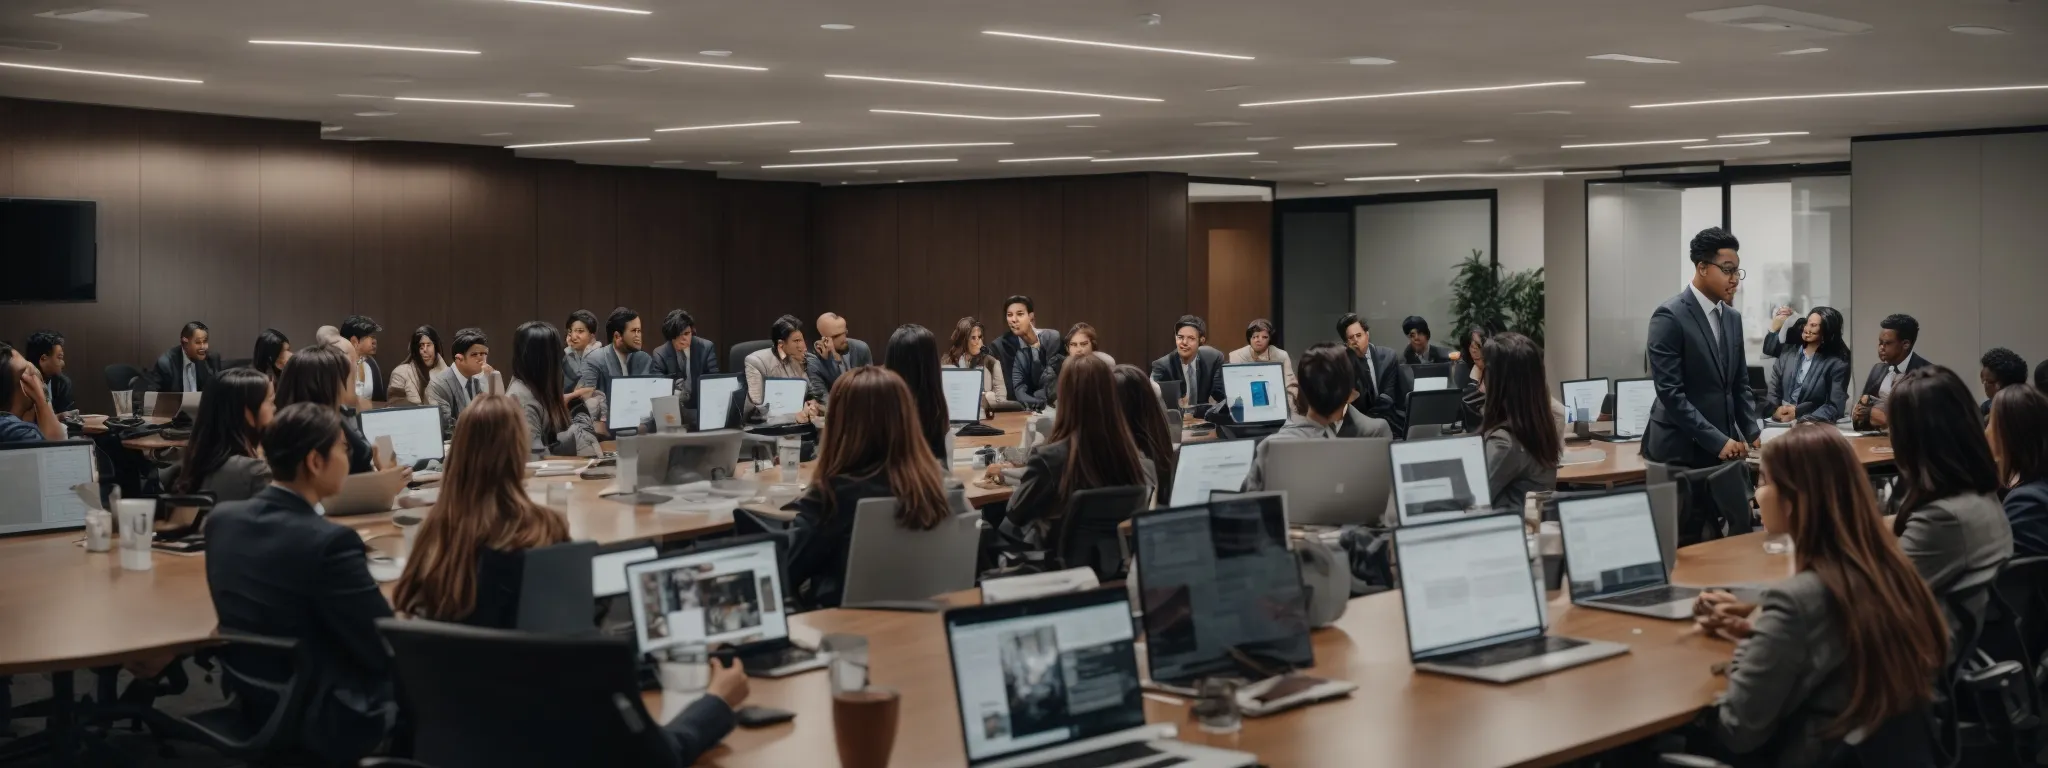 a diverse group of professionals congregates in a bright, modern conference room, engaging in lively discussions around a large table with multiple laptops open.